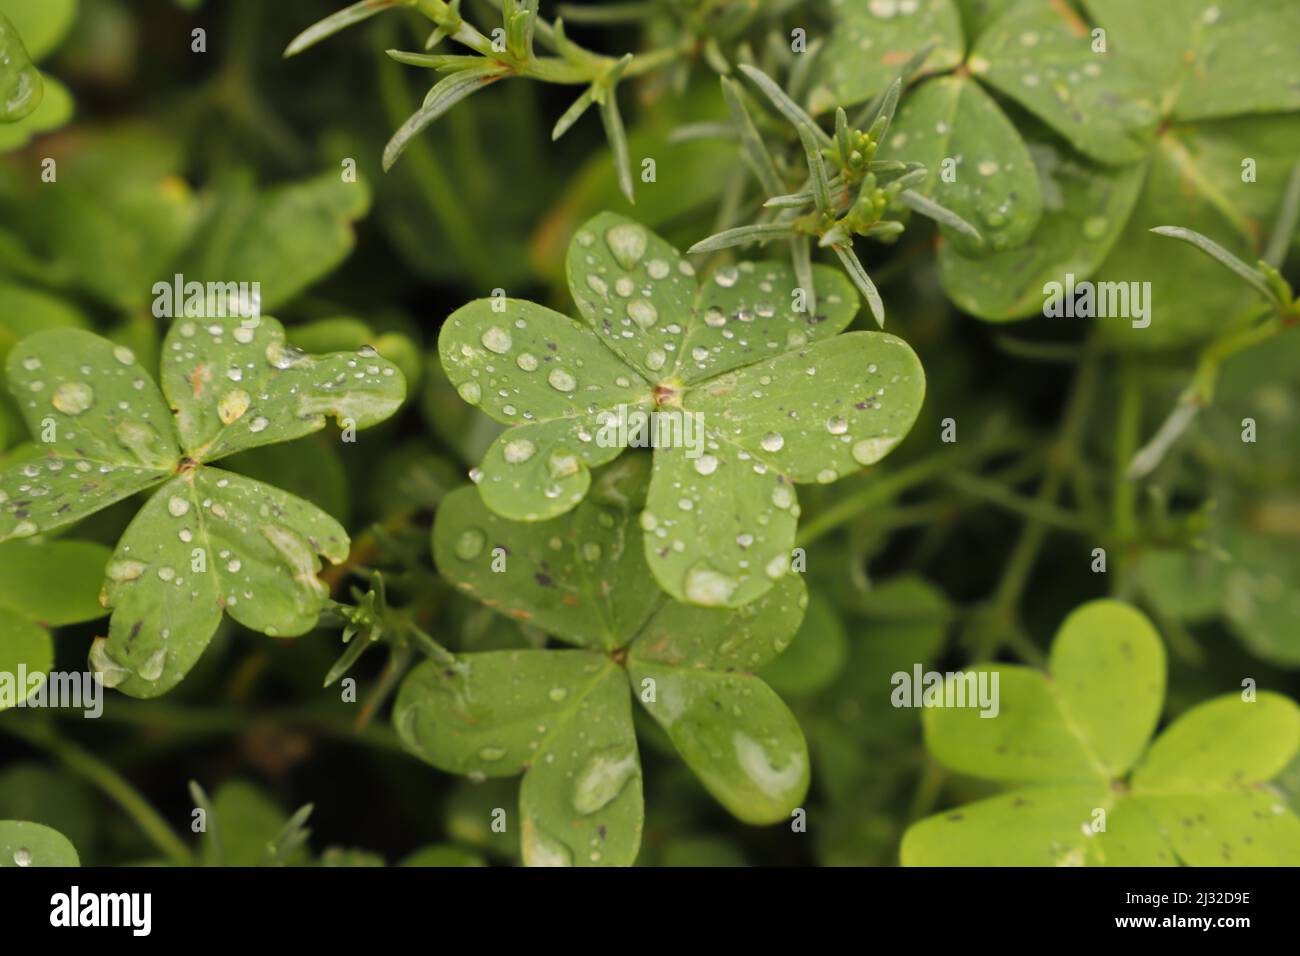 Leaves with raindrops of the oxalis buttercup Stock Photo